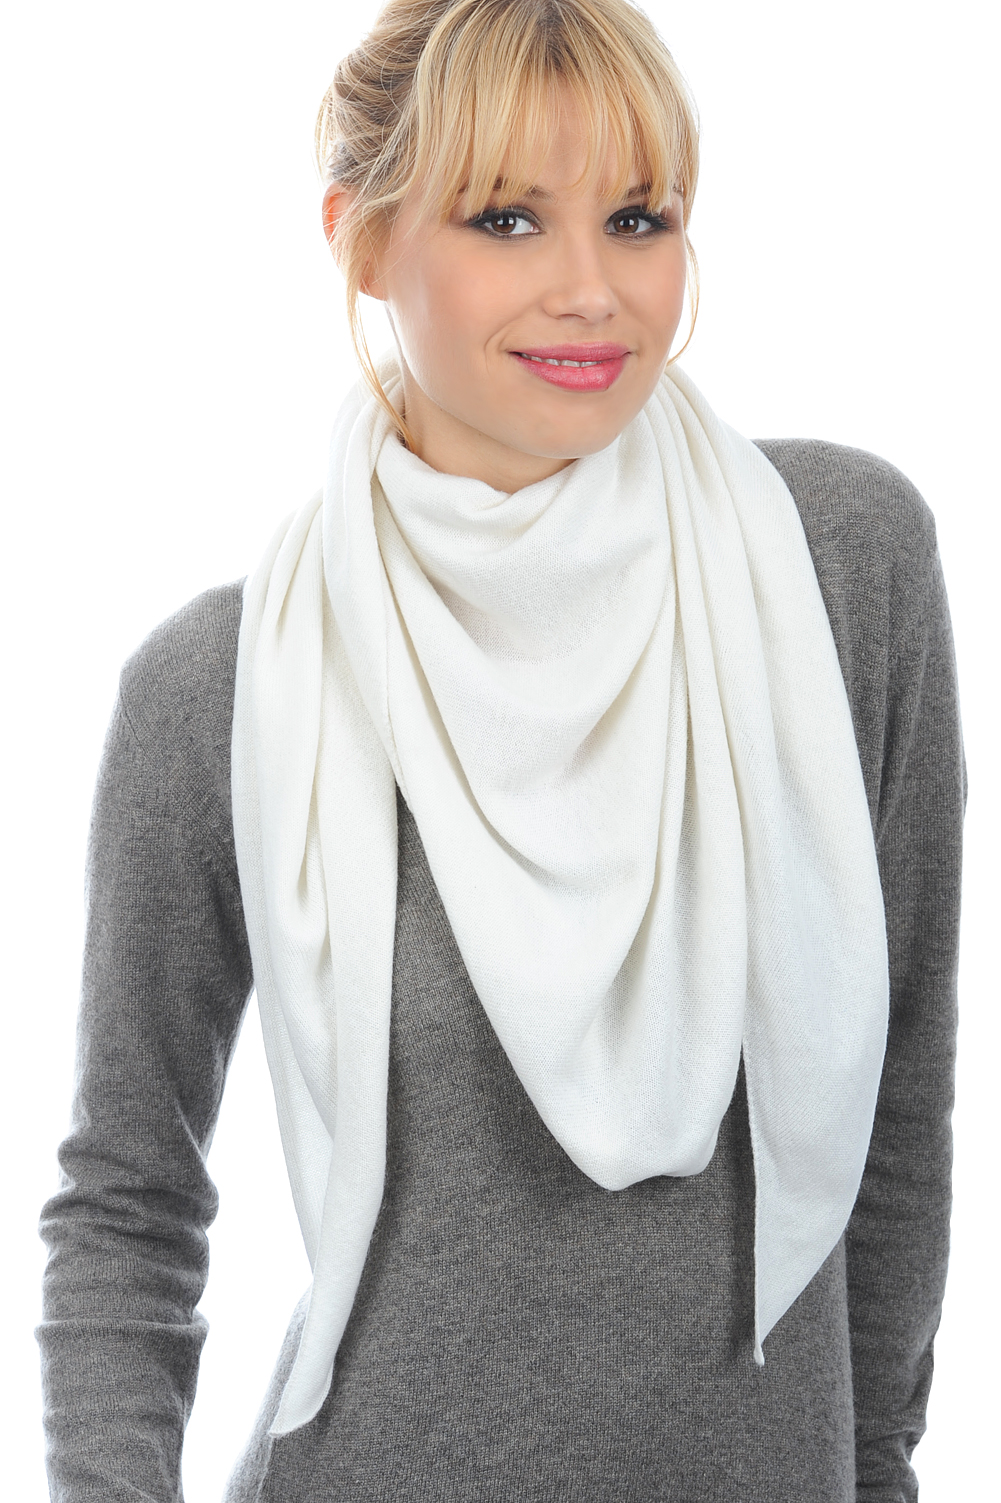 Cashmere ladies scarves mufflers argan off white one size